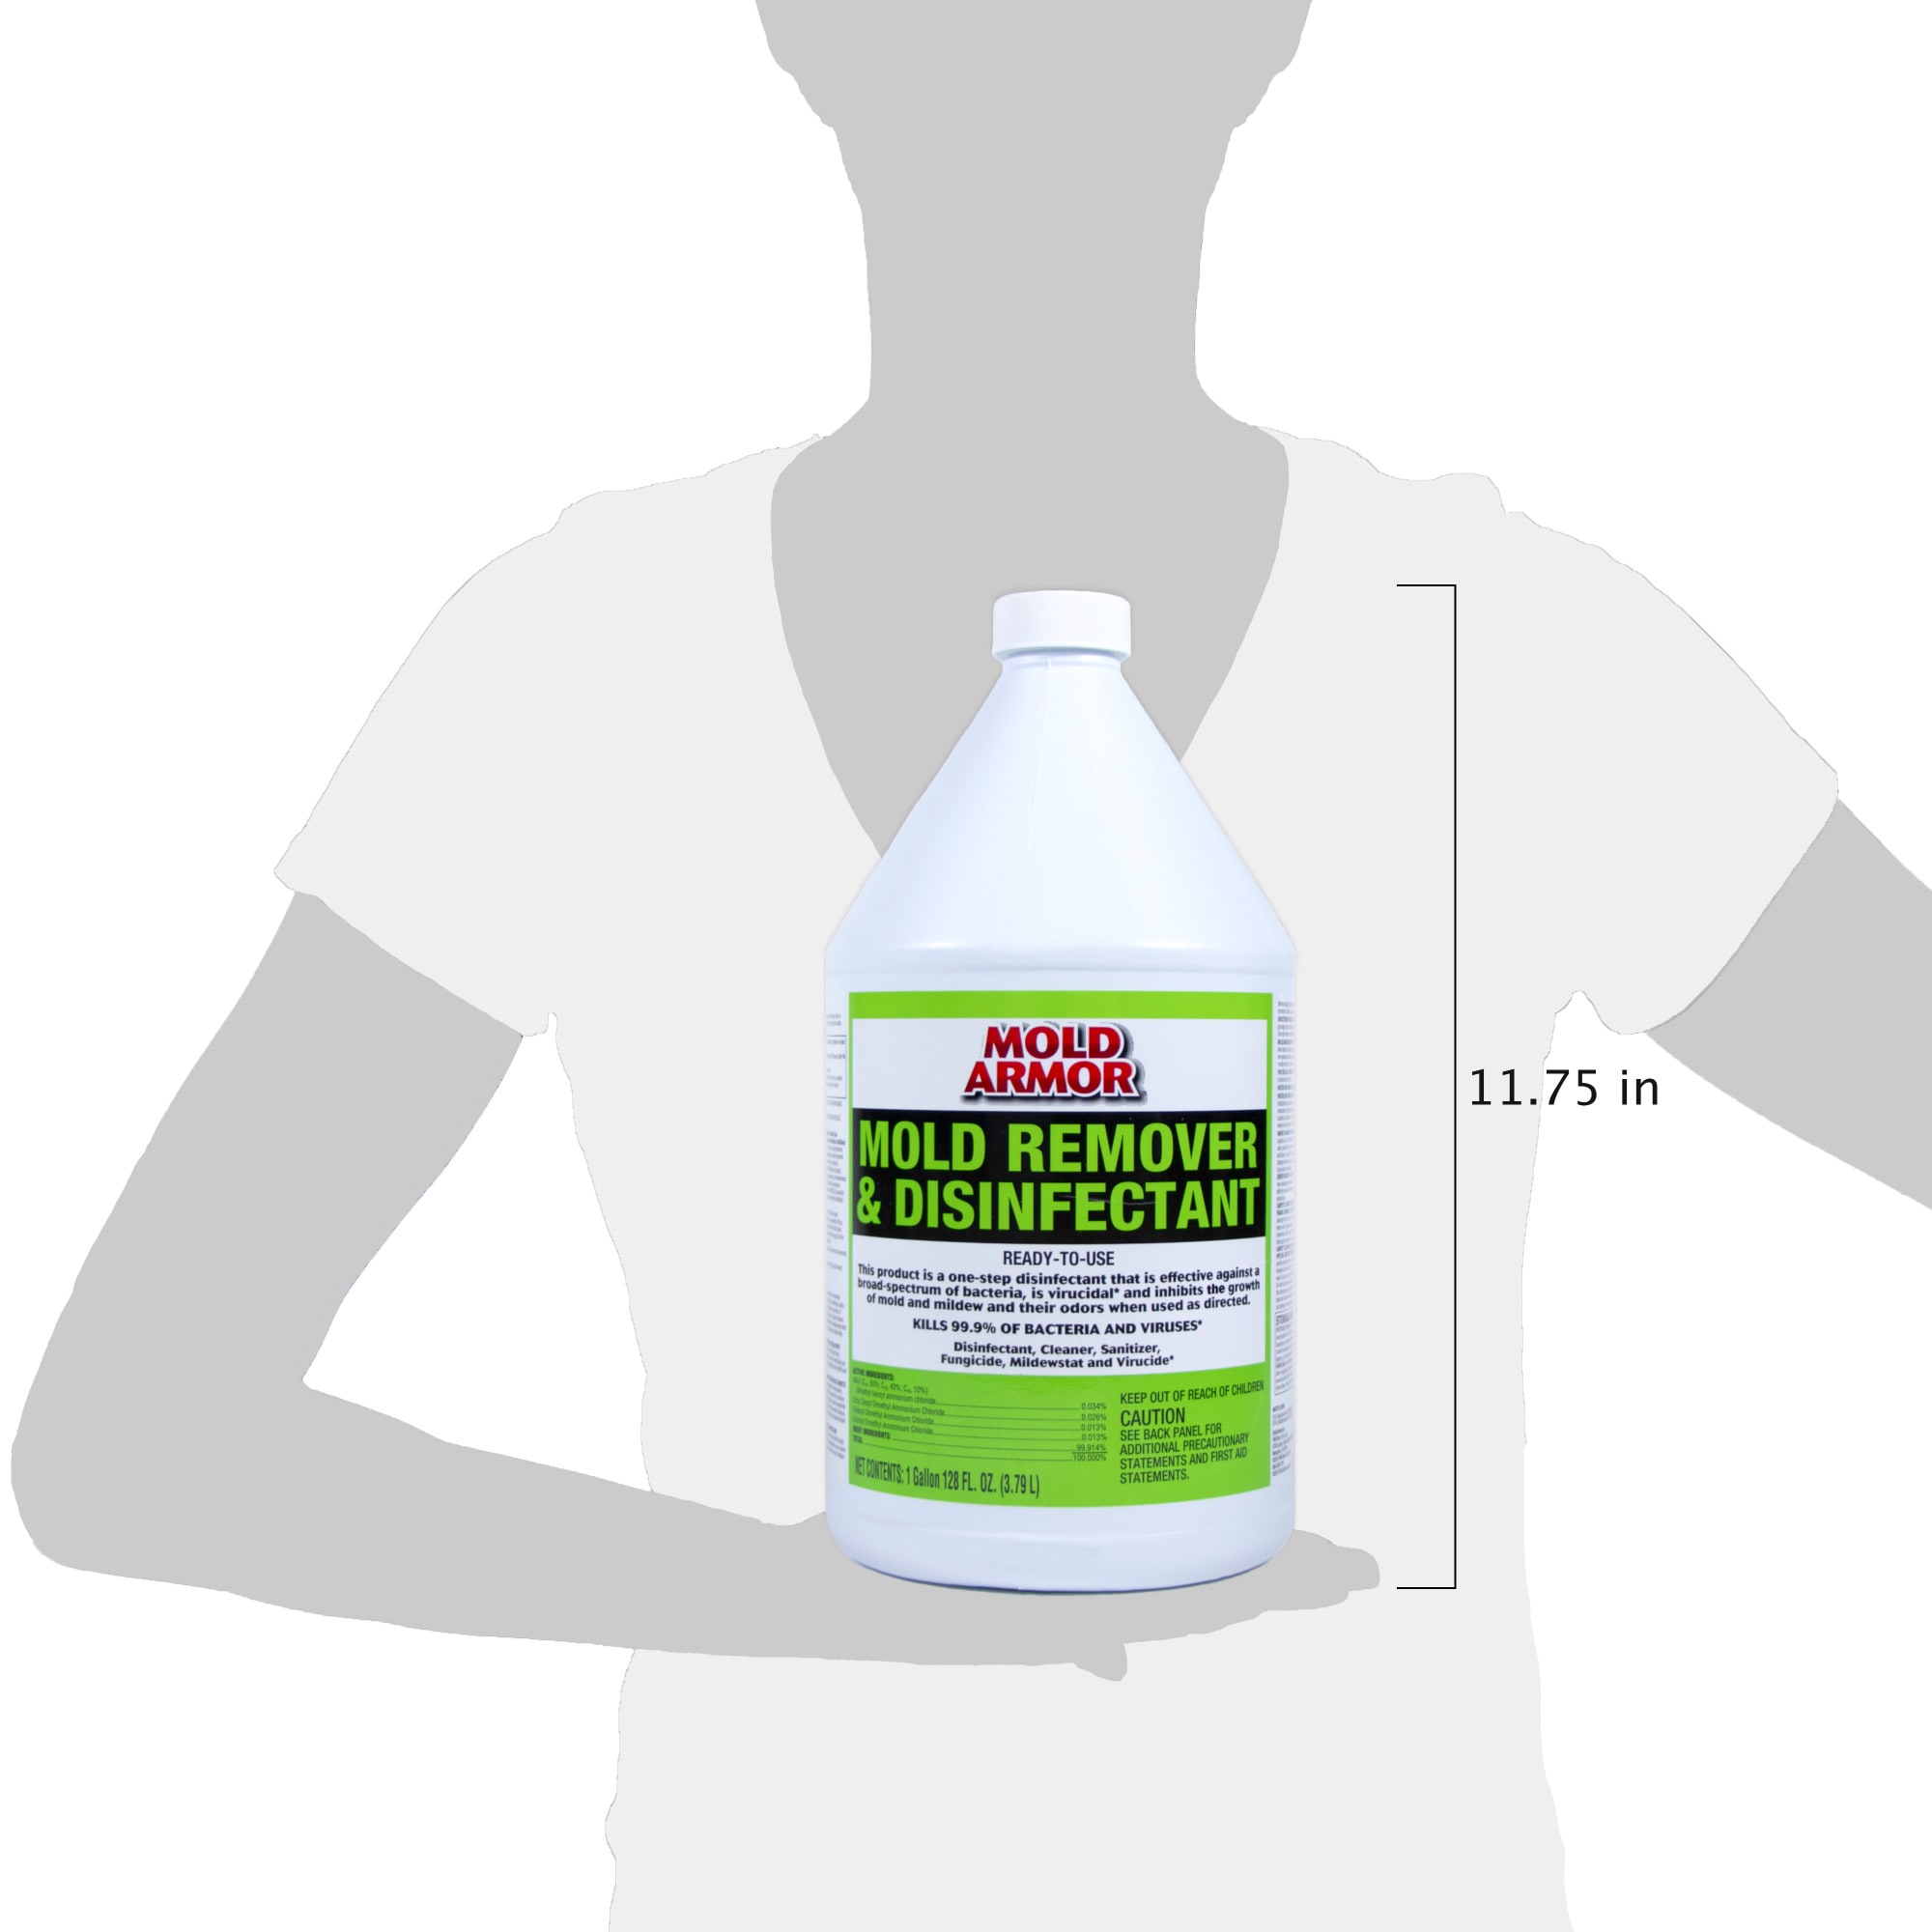 MOLD ARMOR Mold Remover & Disinfectant Cleaner – 32 oz. Spray